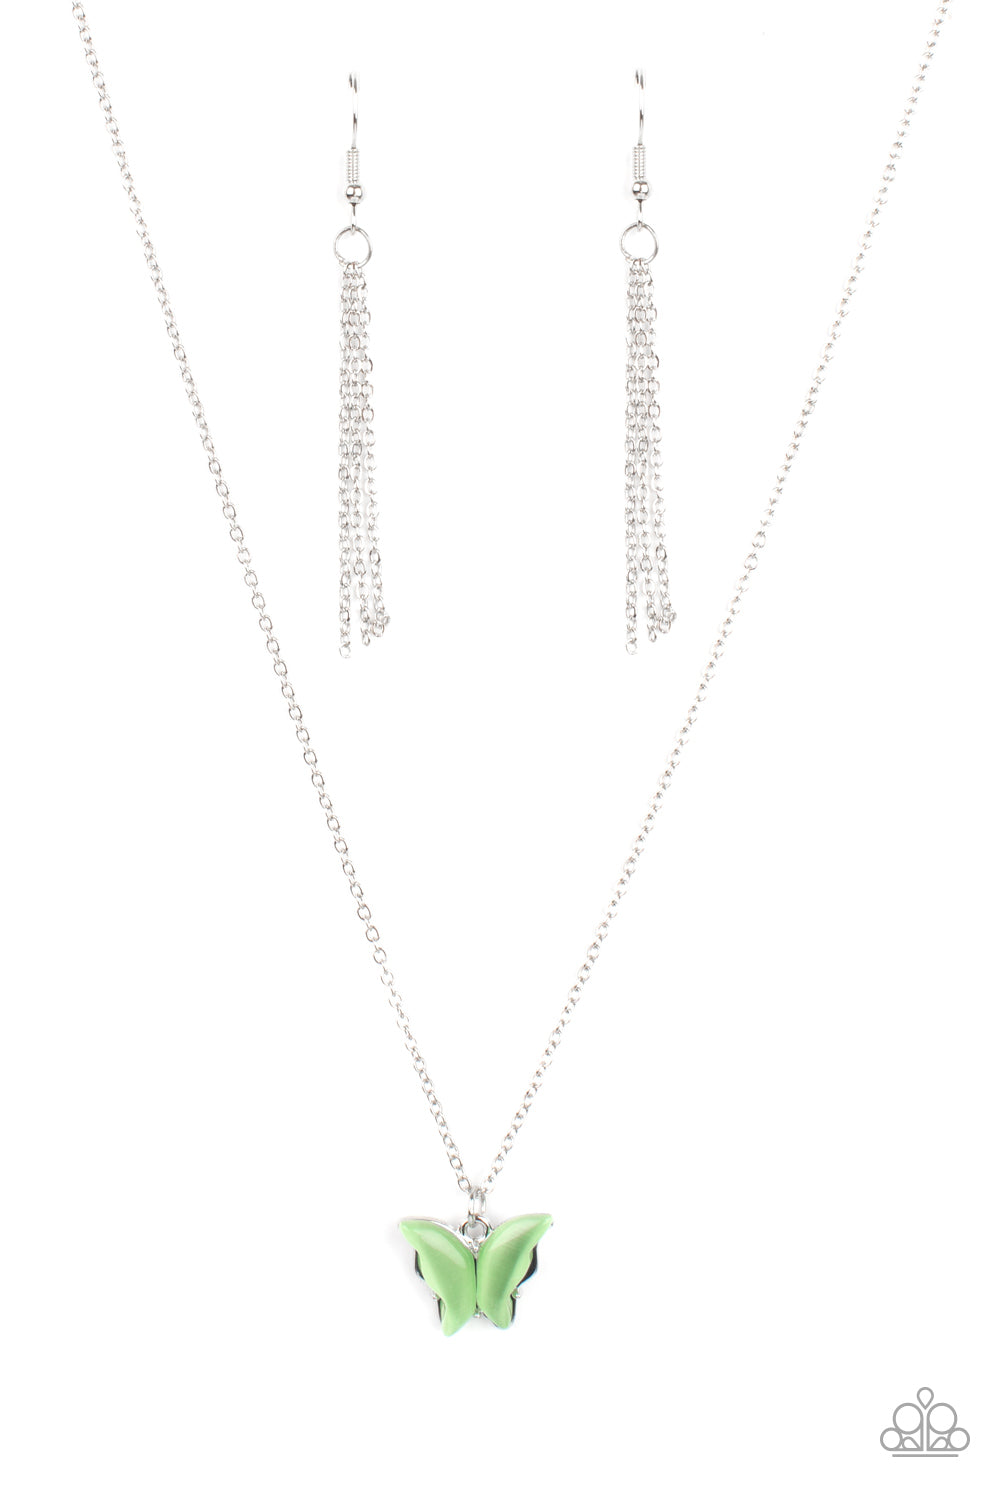 Butterfly Prairies Green Necklace - Paparazzi Accessories  Infused with glistening green cat's eye stone wings, a shiny silver butterfly pendant swings from a dainty silver chain below the collar for a whimsy flair. Features an adjustable clasp closure.  All Paparazzi Accessories are lead free and nickel free!  Sold as one individual necklace. Includes one pair of matching earrings.